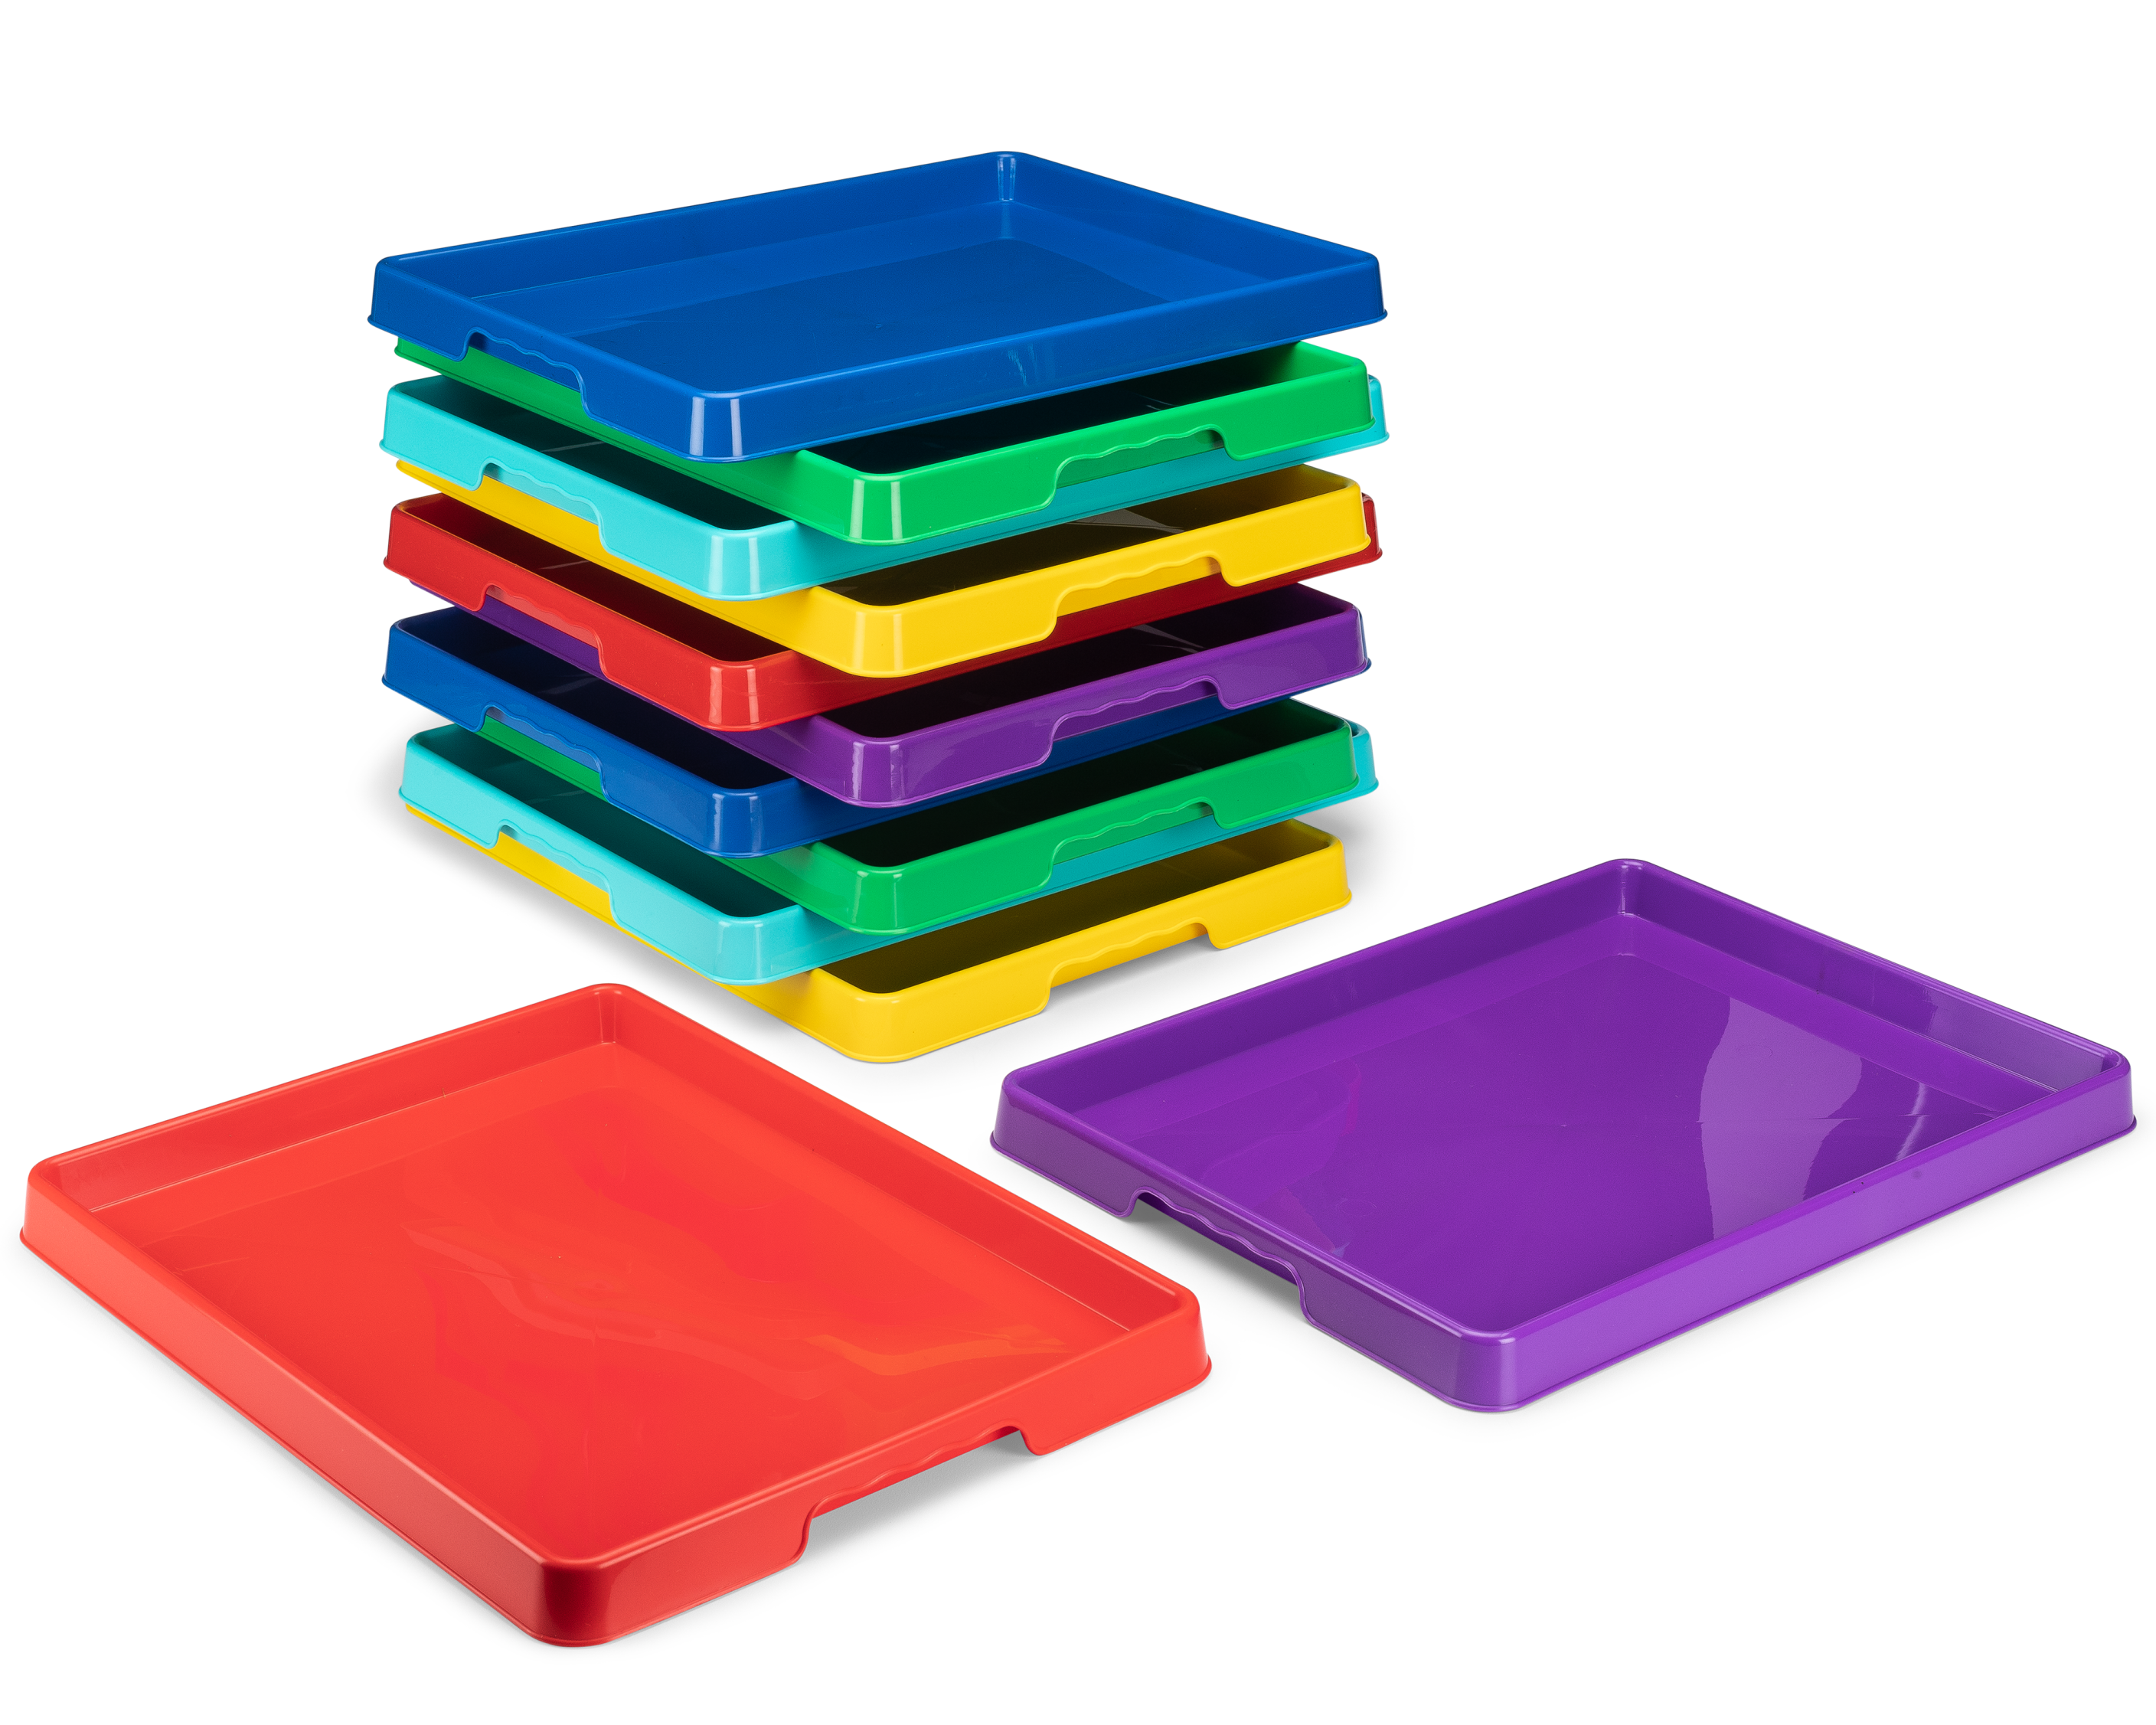 Coloured Plastic Craft Trays: Pack of 3 From 3.00 GBP